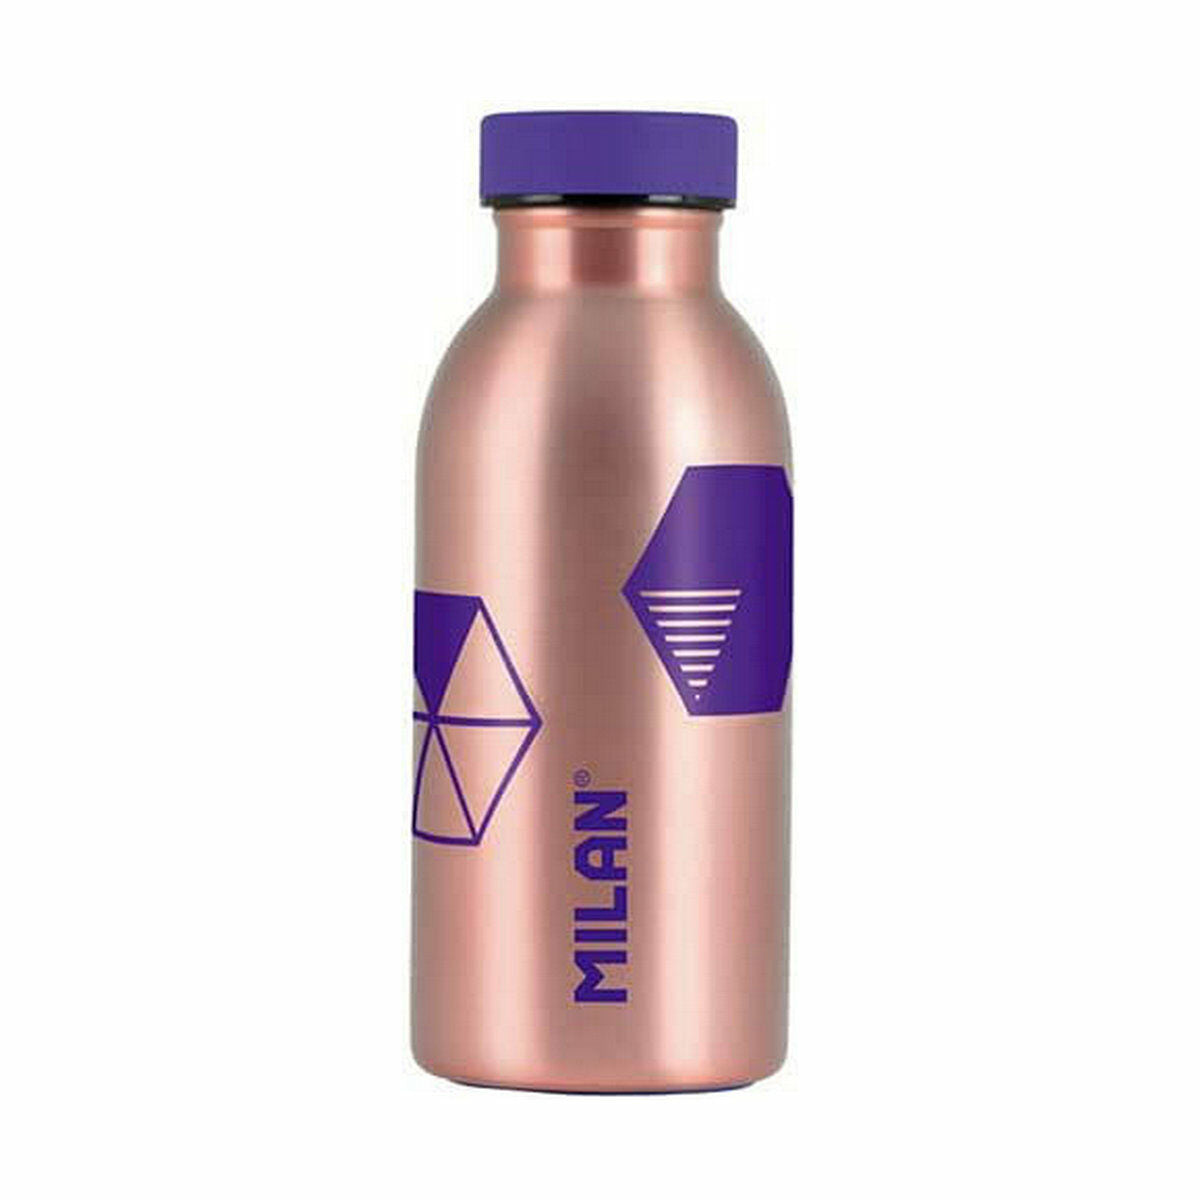 Thermos Milan Lila Roestvrij staal (354 ml)